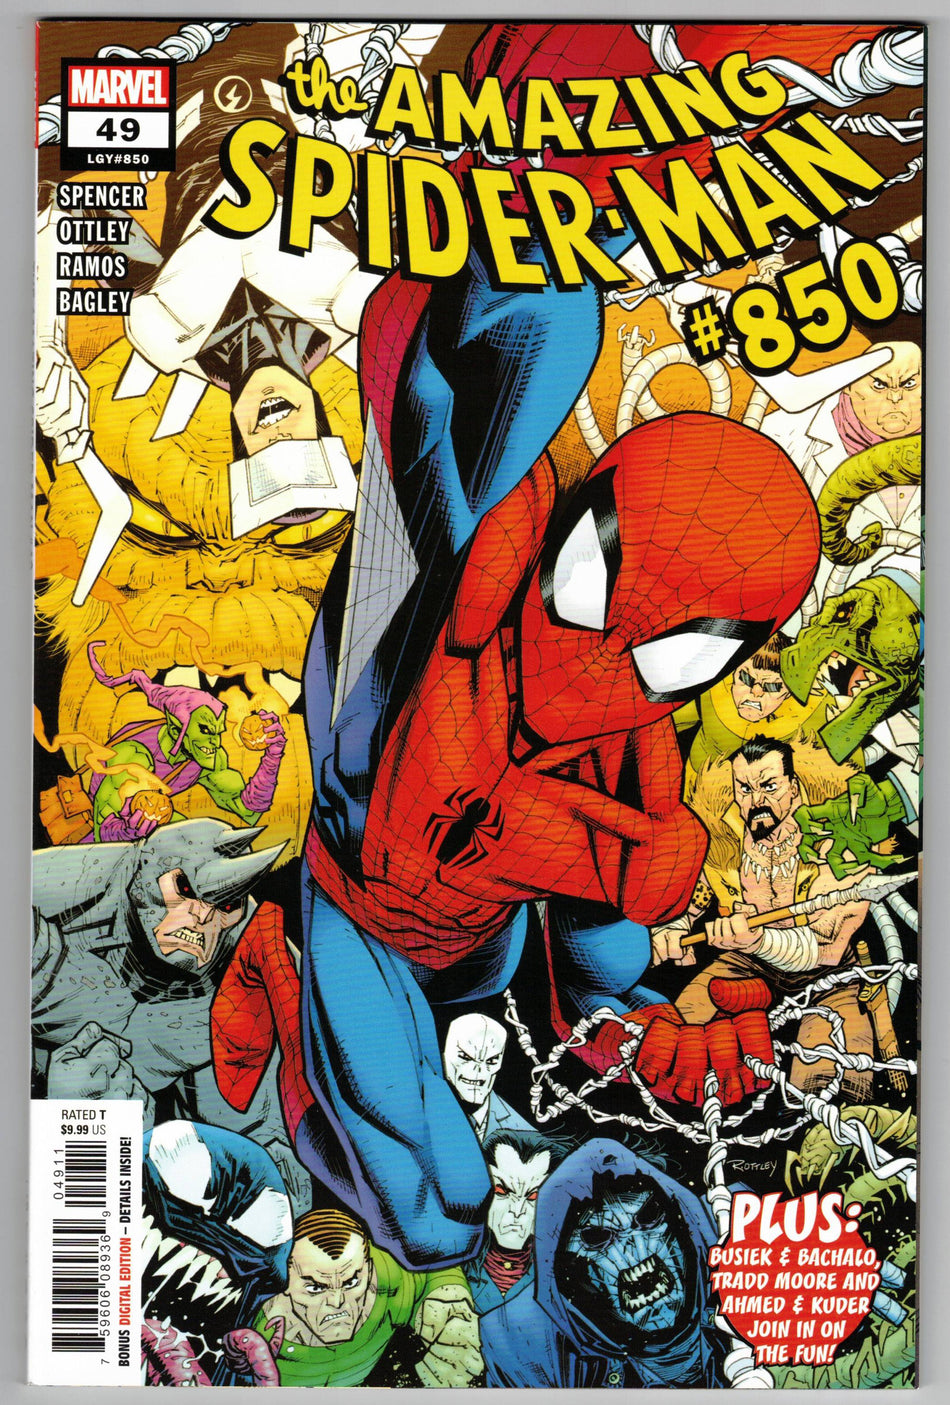 Photo of Near Mint The Amazing Spider-Man, Vol. 5 (2020) Issue 49/850 A Regular Ryan Ottley Cover Chapter One: Unstoppable/Chapter Two: The Debt/Chapter Three: Your Choice/All You Need Is...?/Four Shoes!/A Family Affair Comic sold by Stronghold Collectibles